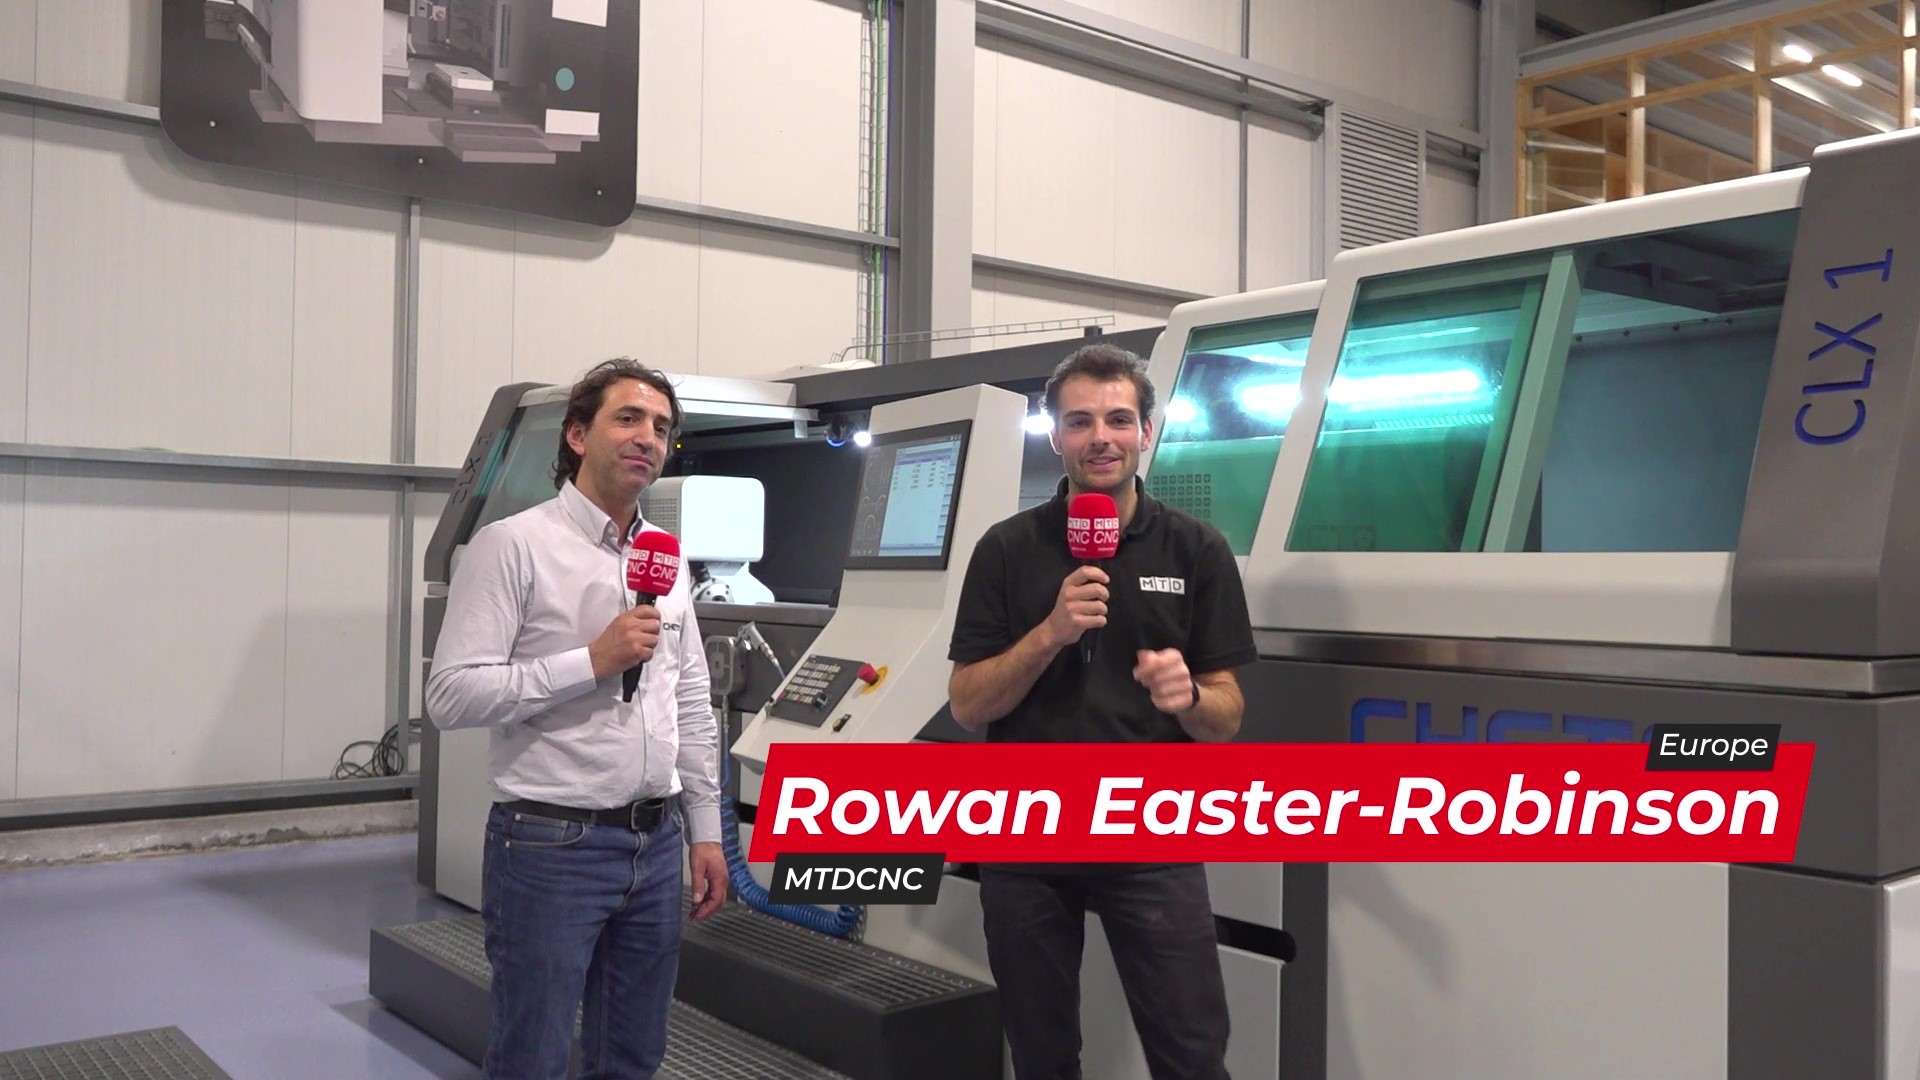  MTDCNC: Interview with Sérgio André explaining about CHETO CLX 1 machine